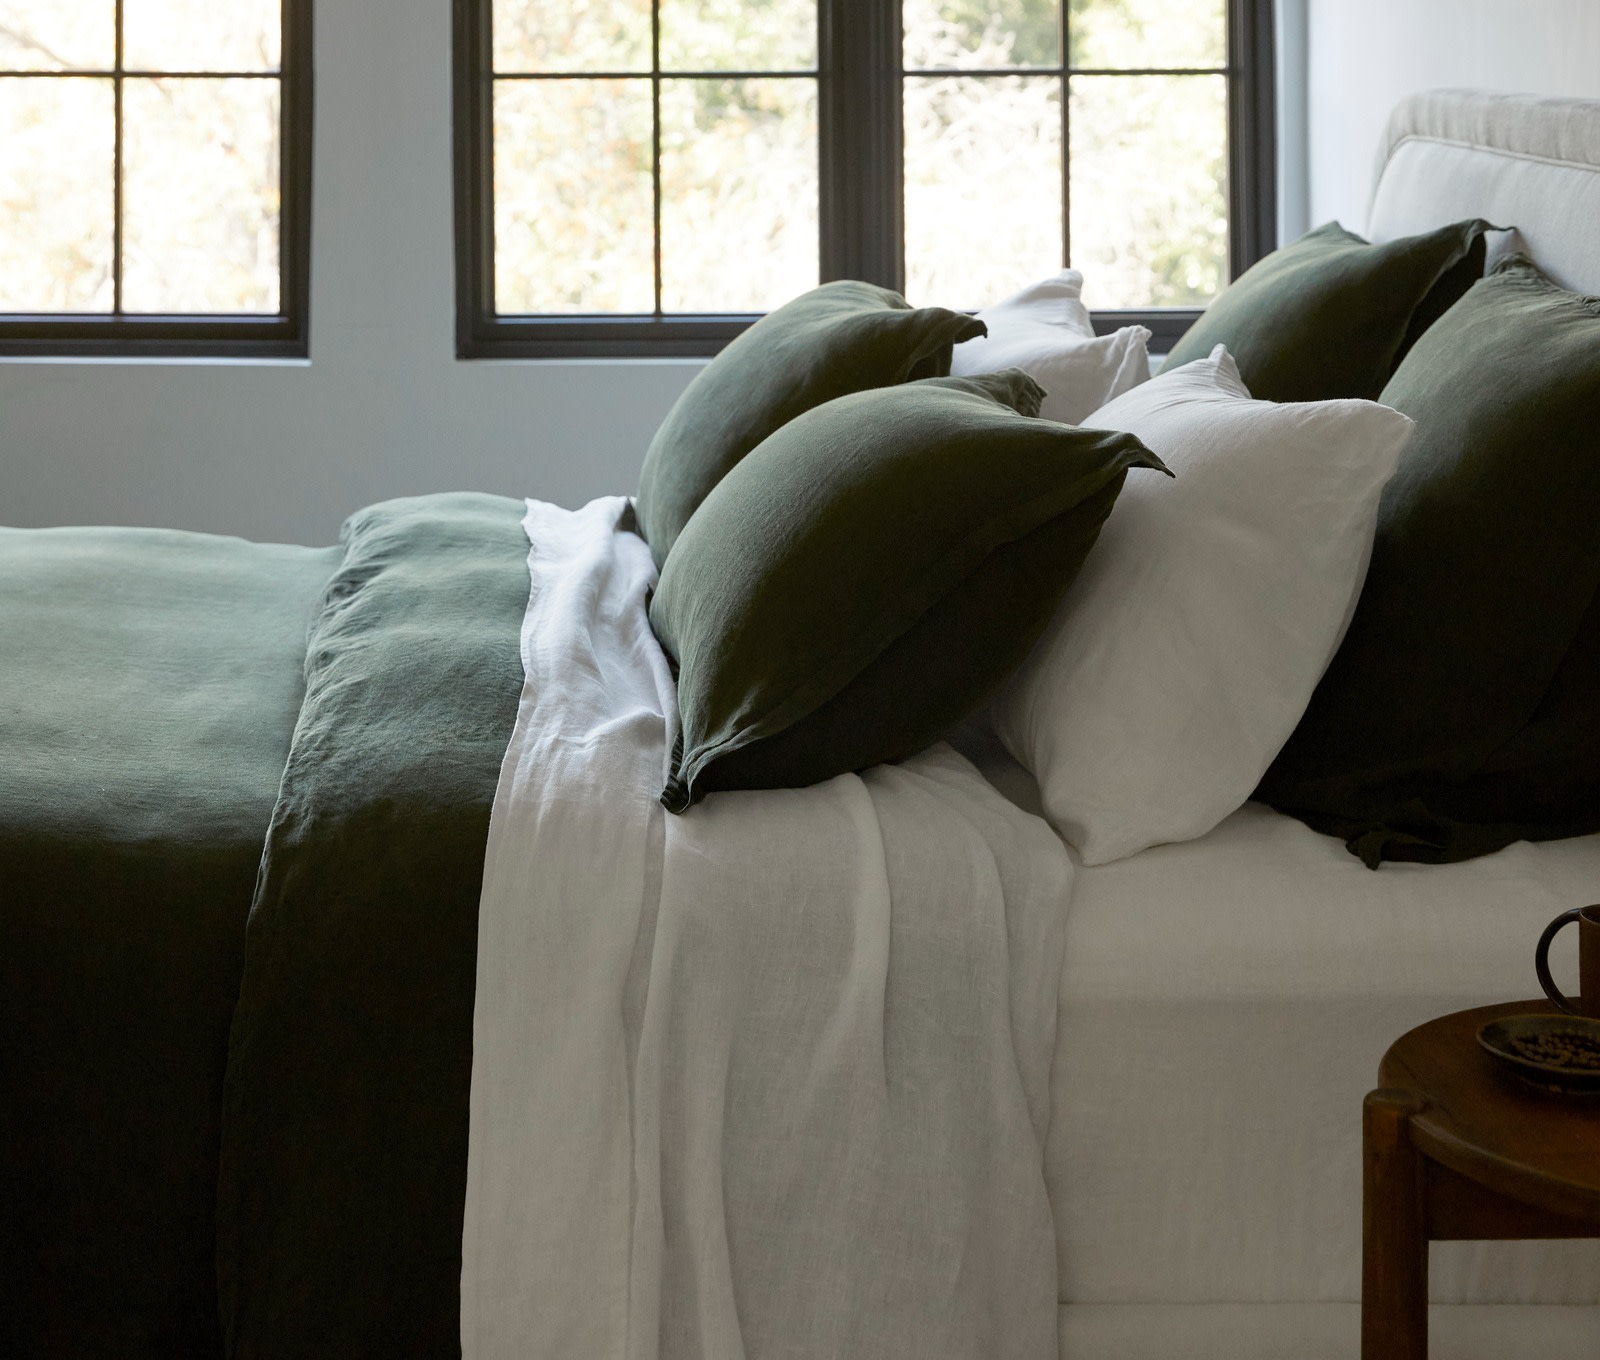 A bed filled with white linen pillows